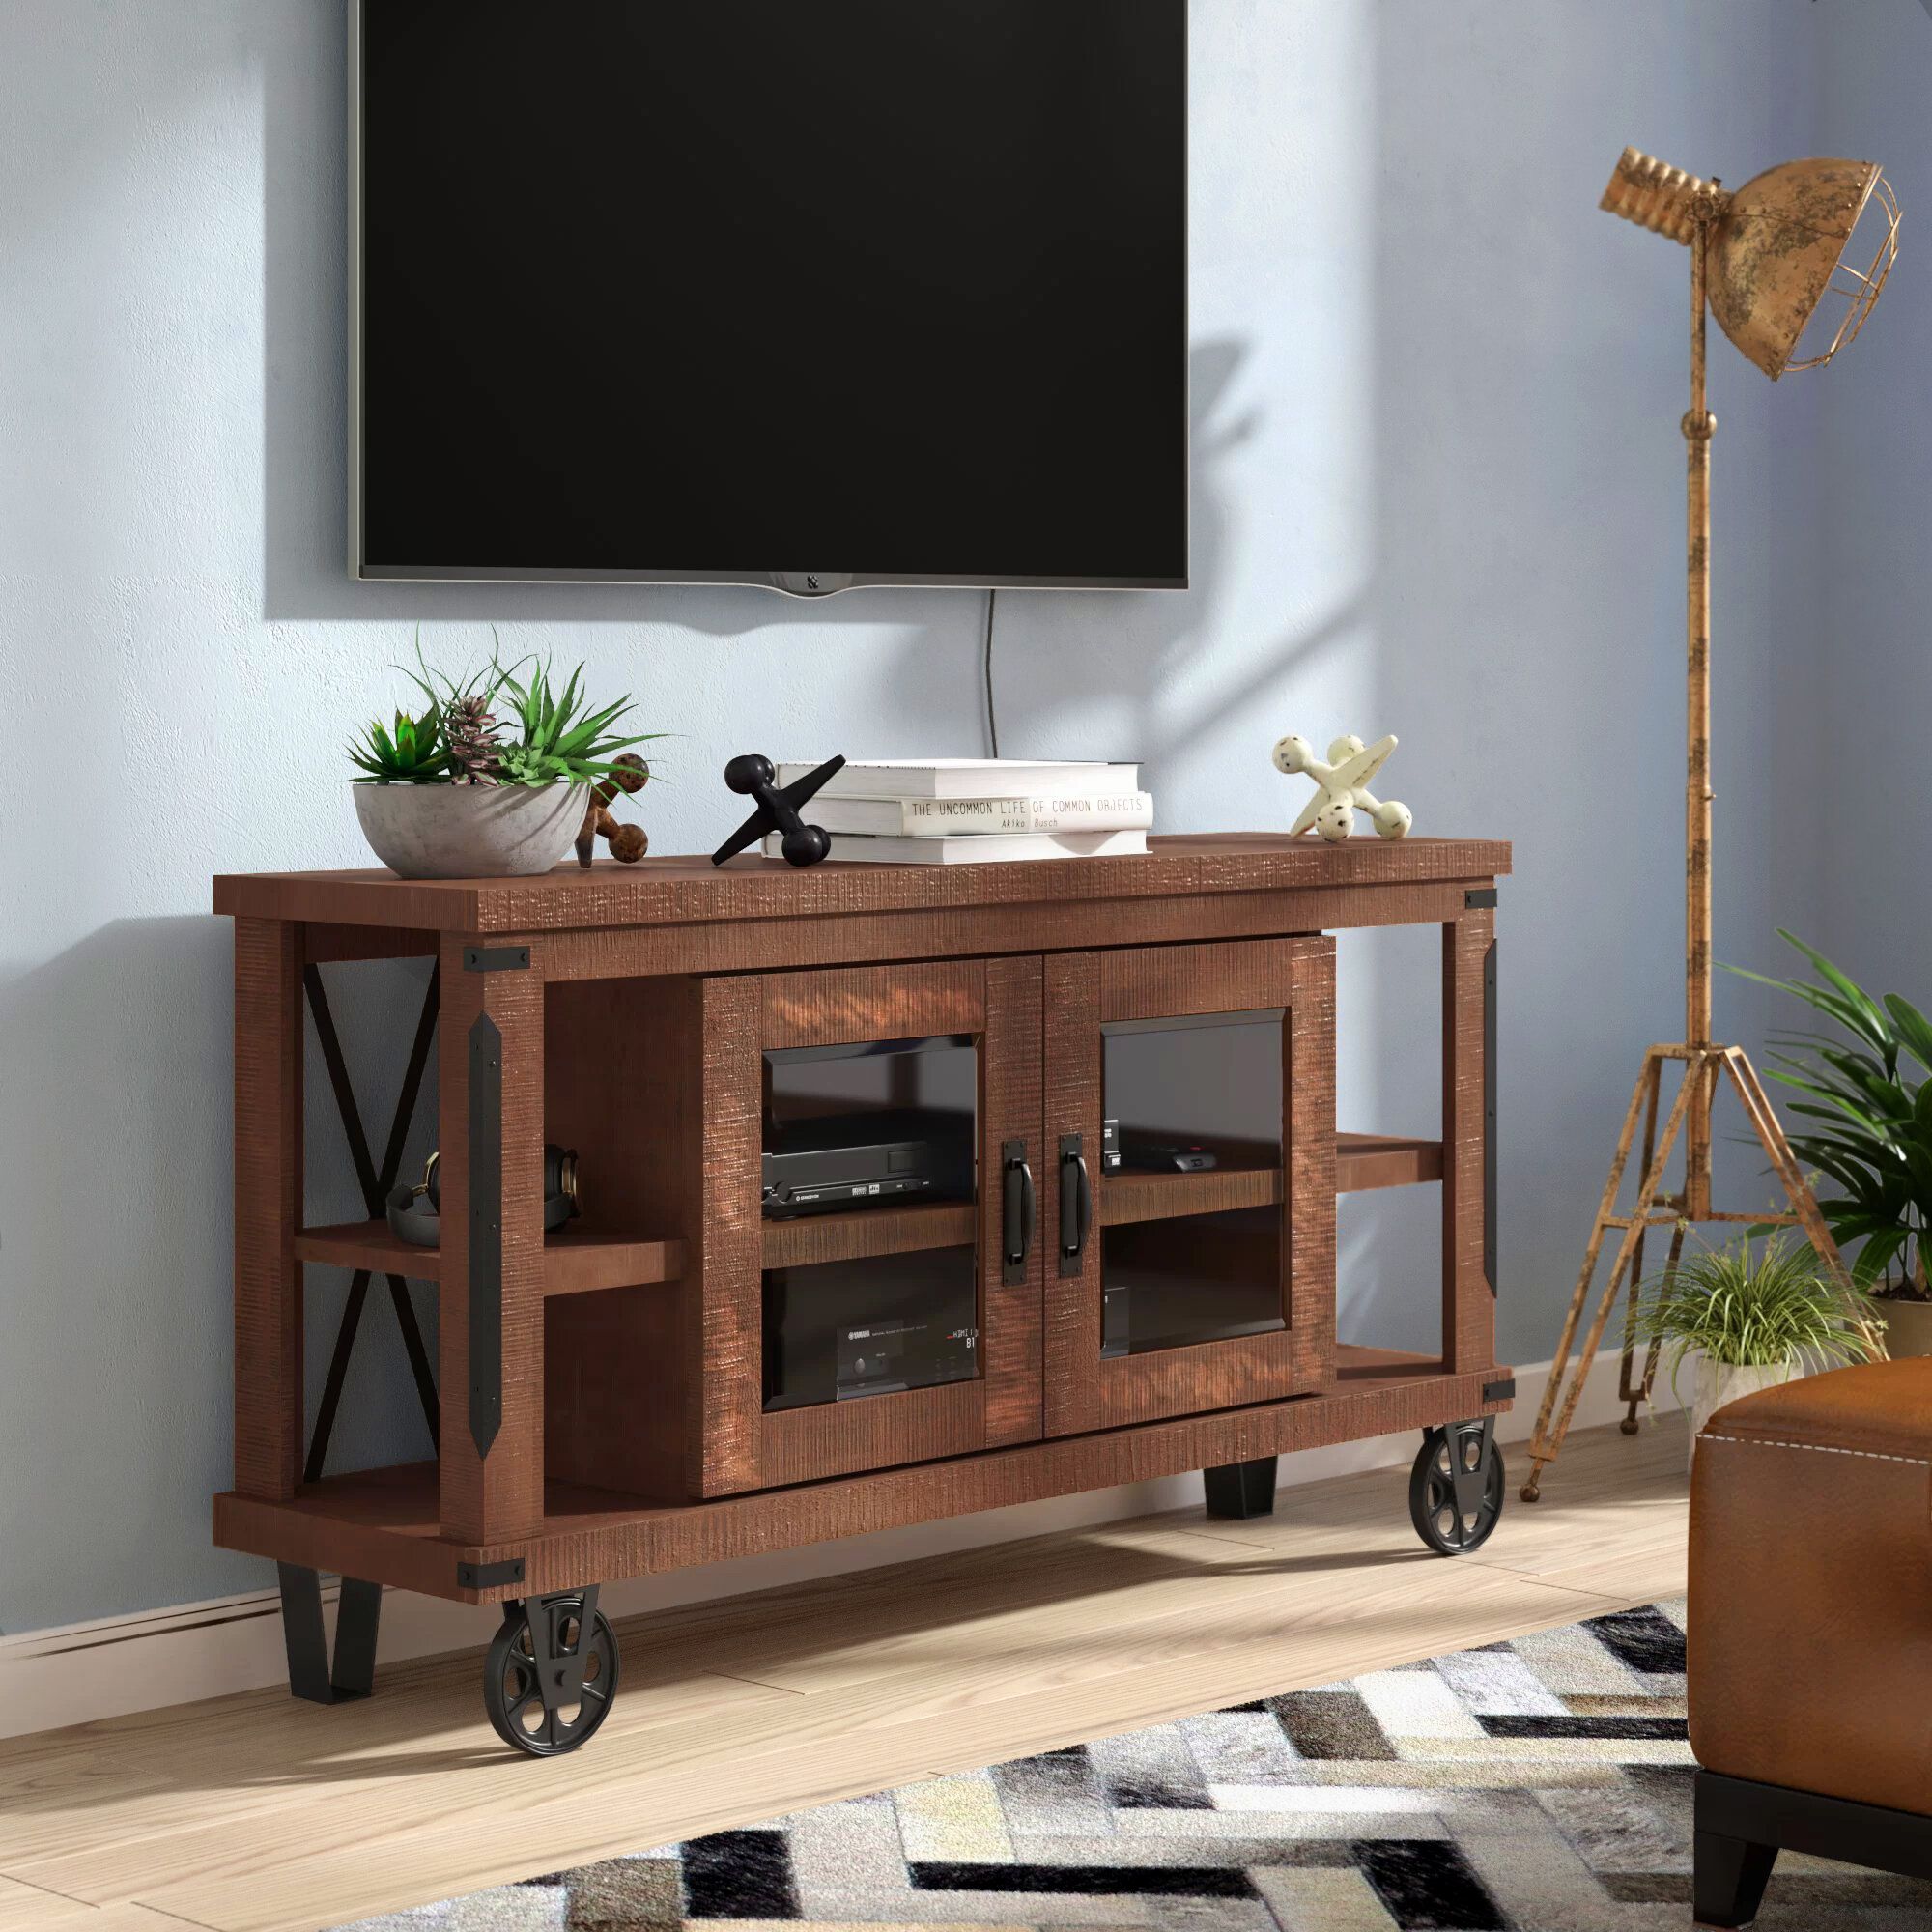 Tv Stand Casters Wheels – Tavr Moblile Floor Tv Stand Cart With Audio Regarding Modern Rolling Tv Stands (View 10 of 20)